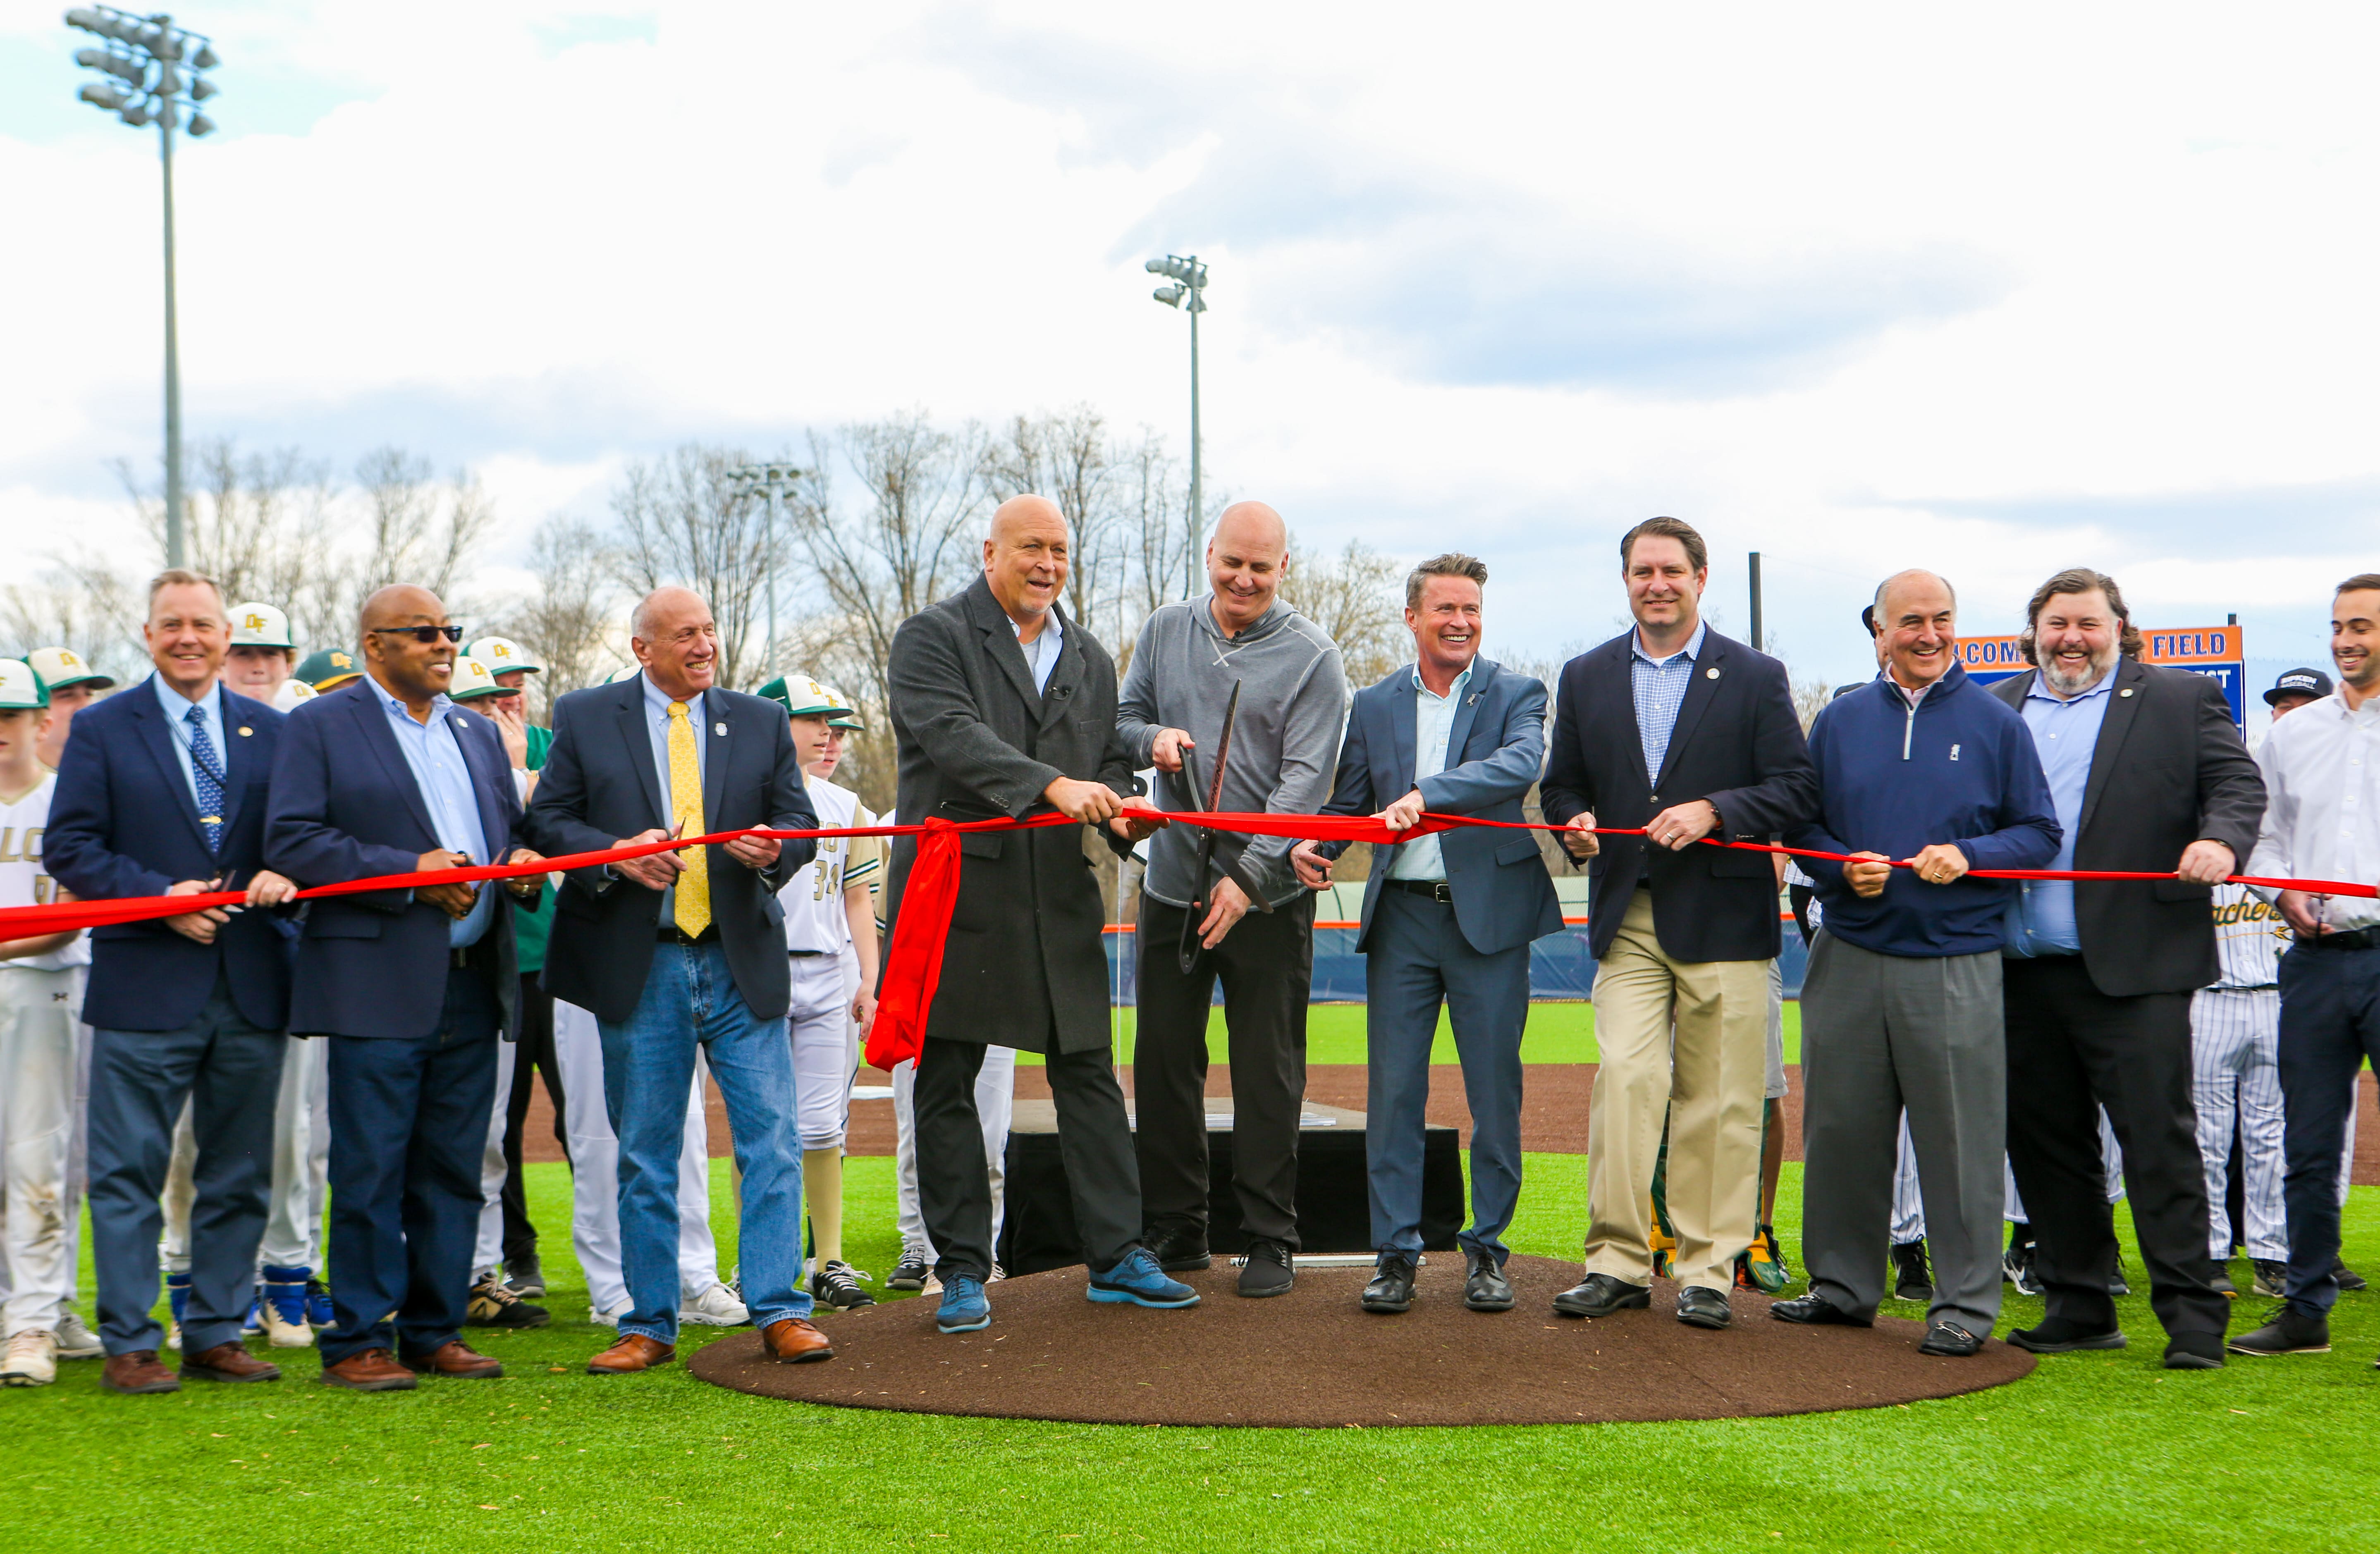 Cal and Bill Ripken open The Ripken Experiences Two Newest Fields, CITI Field and PNC Park